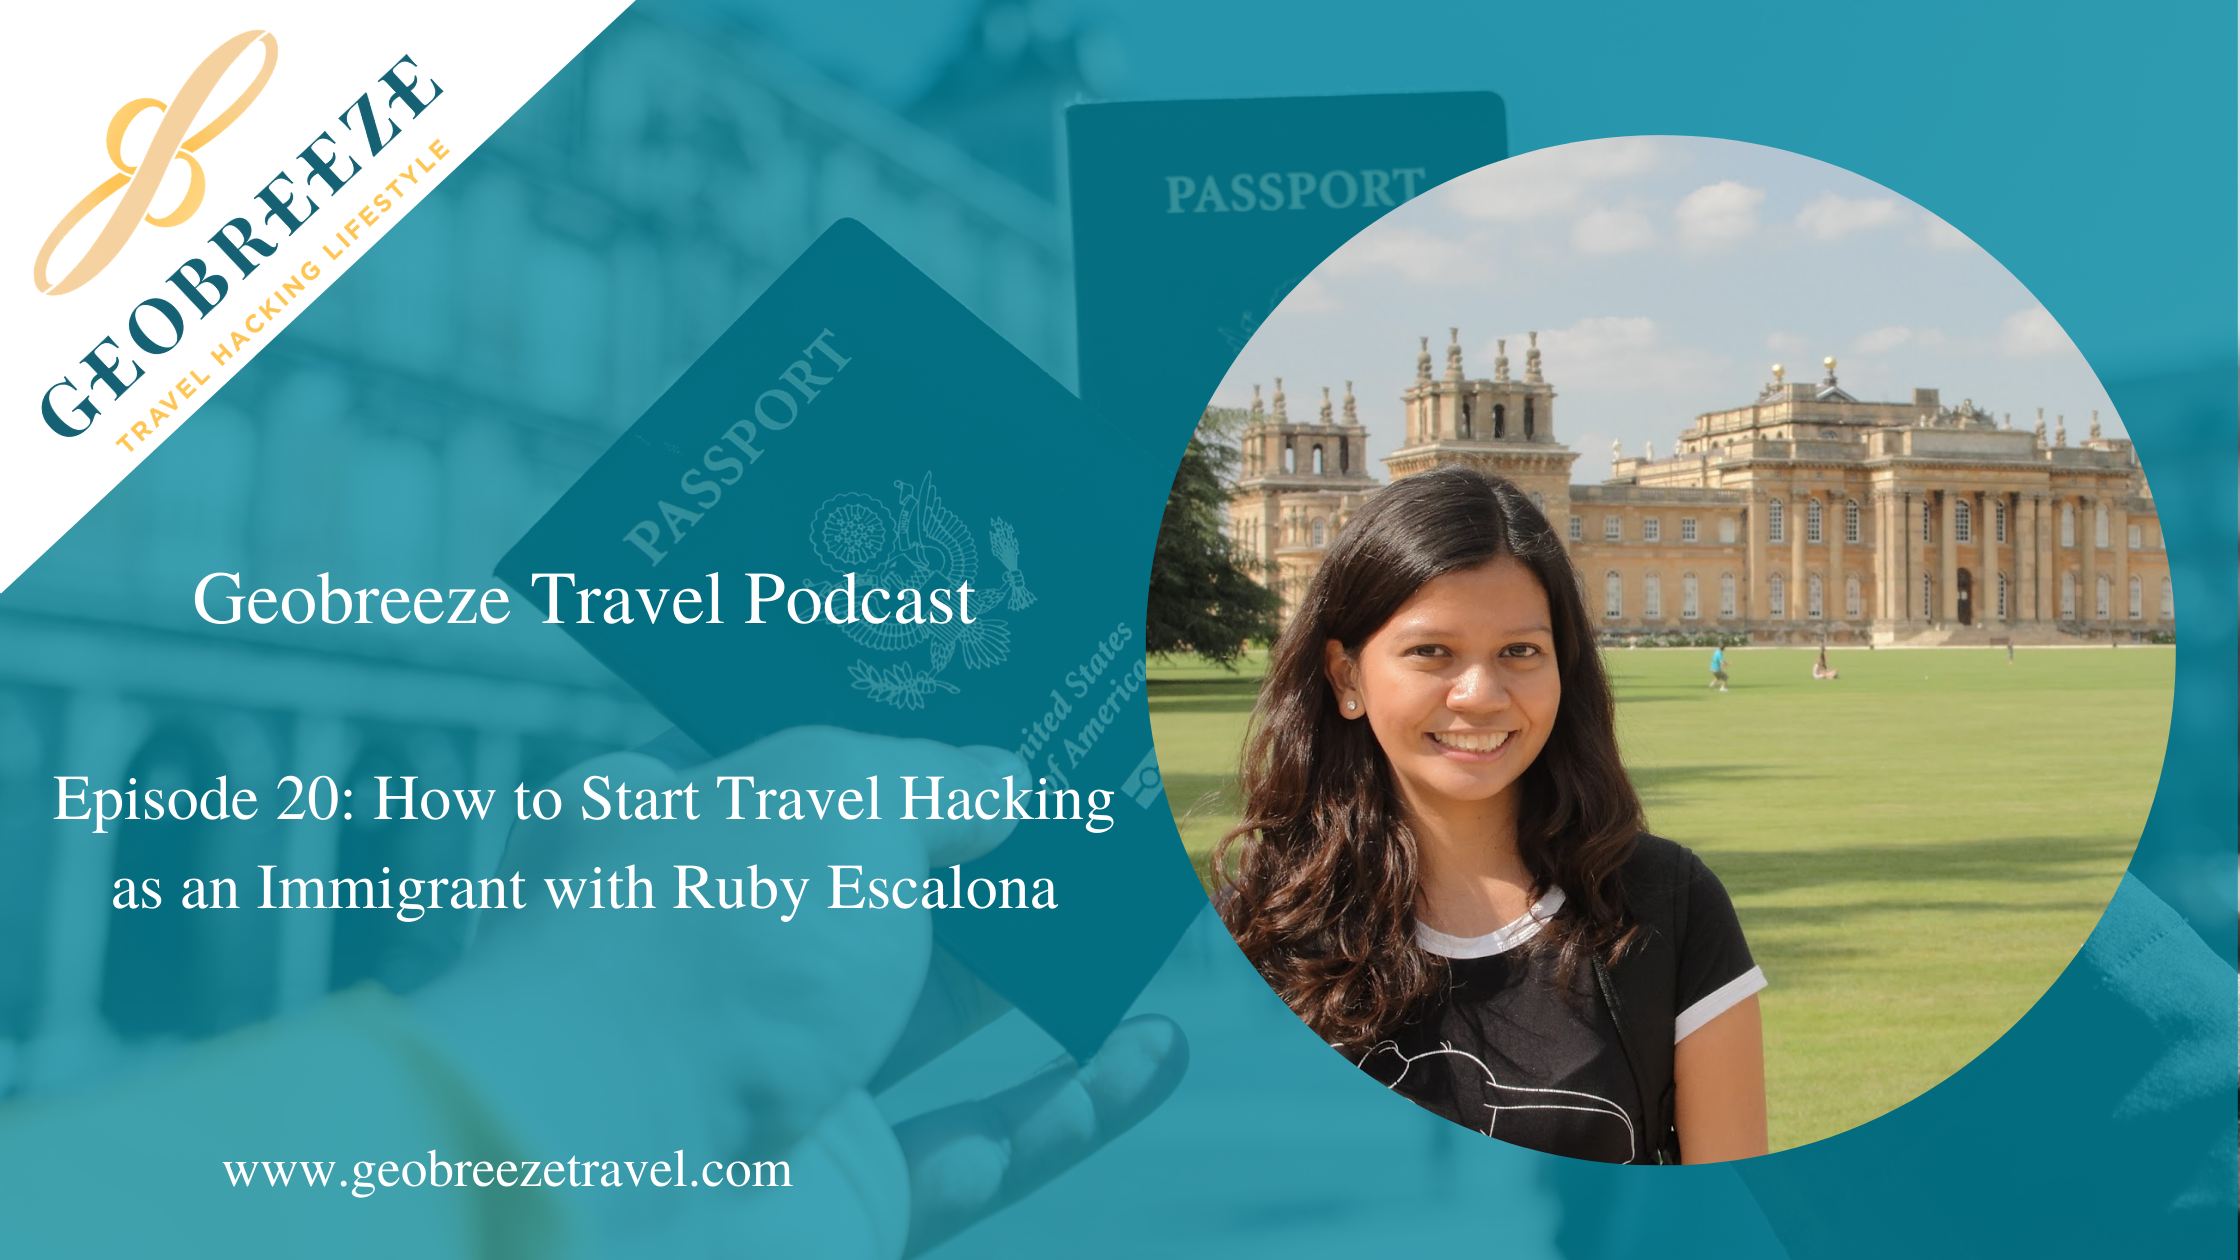 Episode 20: How to Start Travel Hacking as an Immigrant with Ruby Escalona